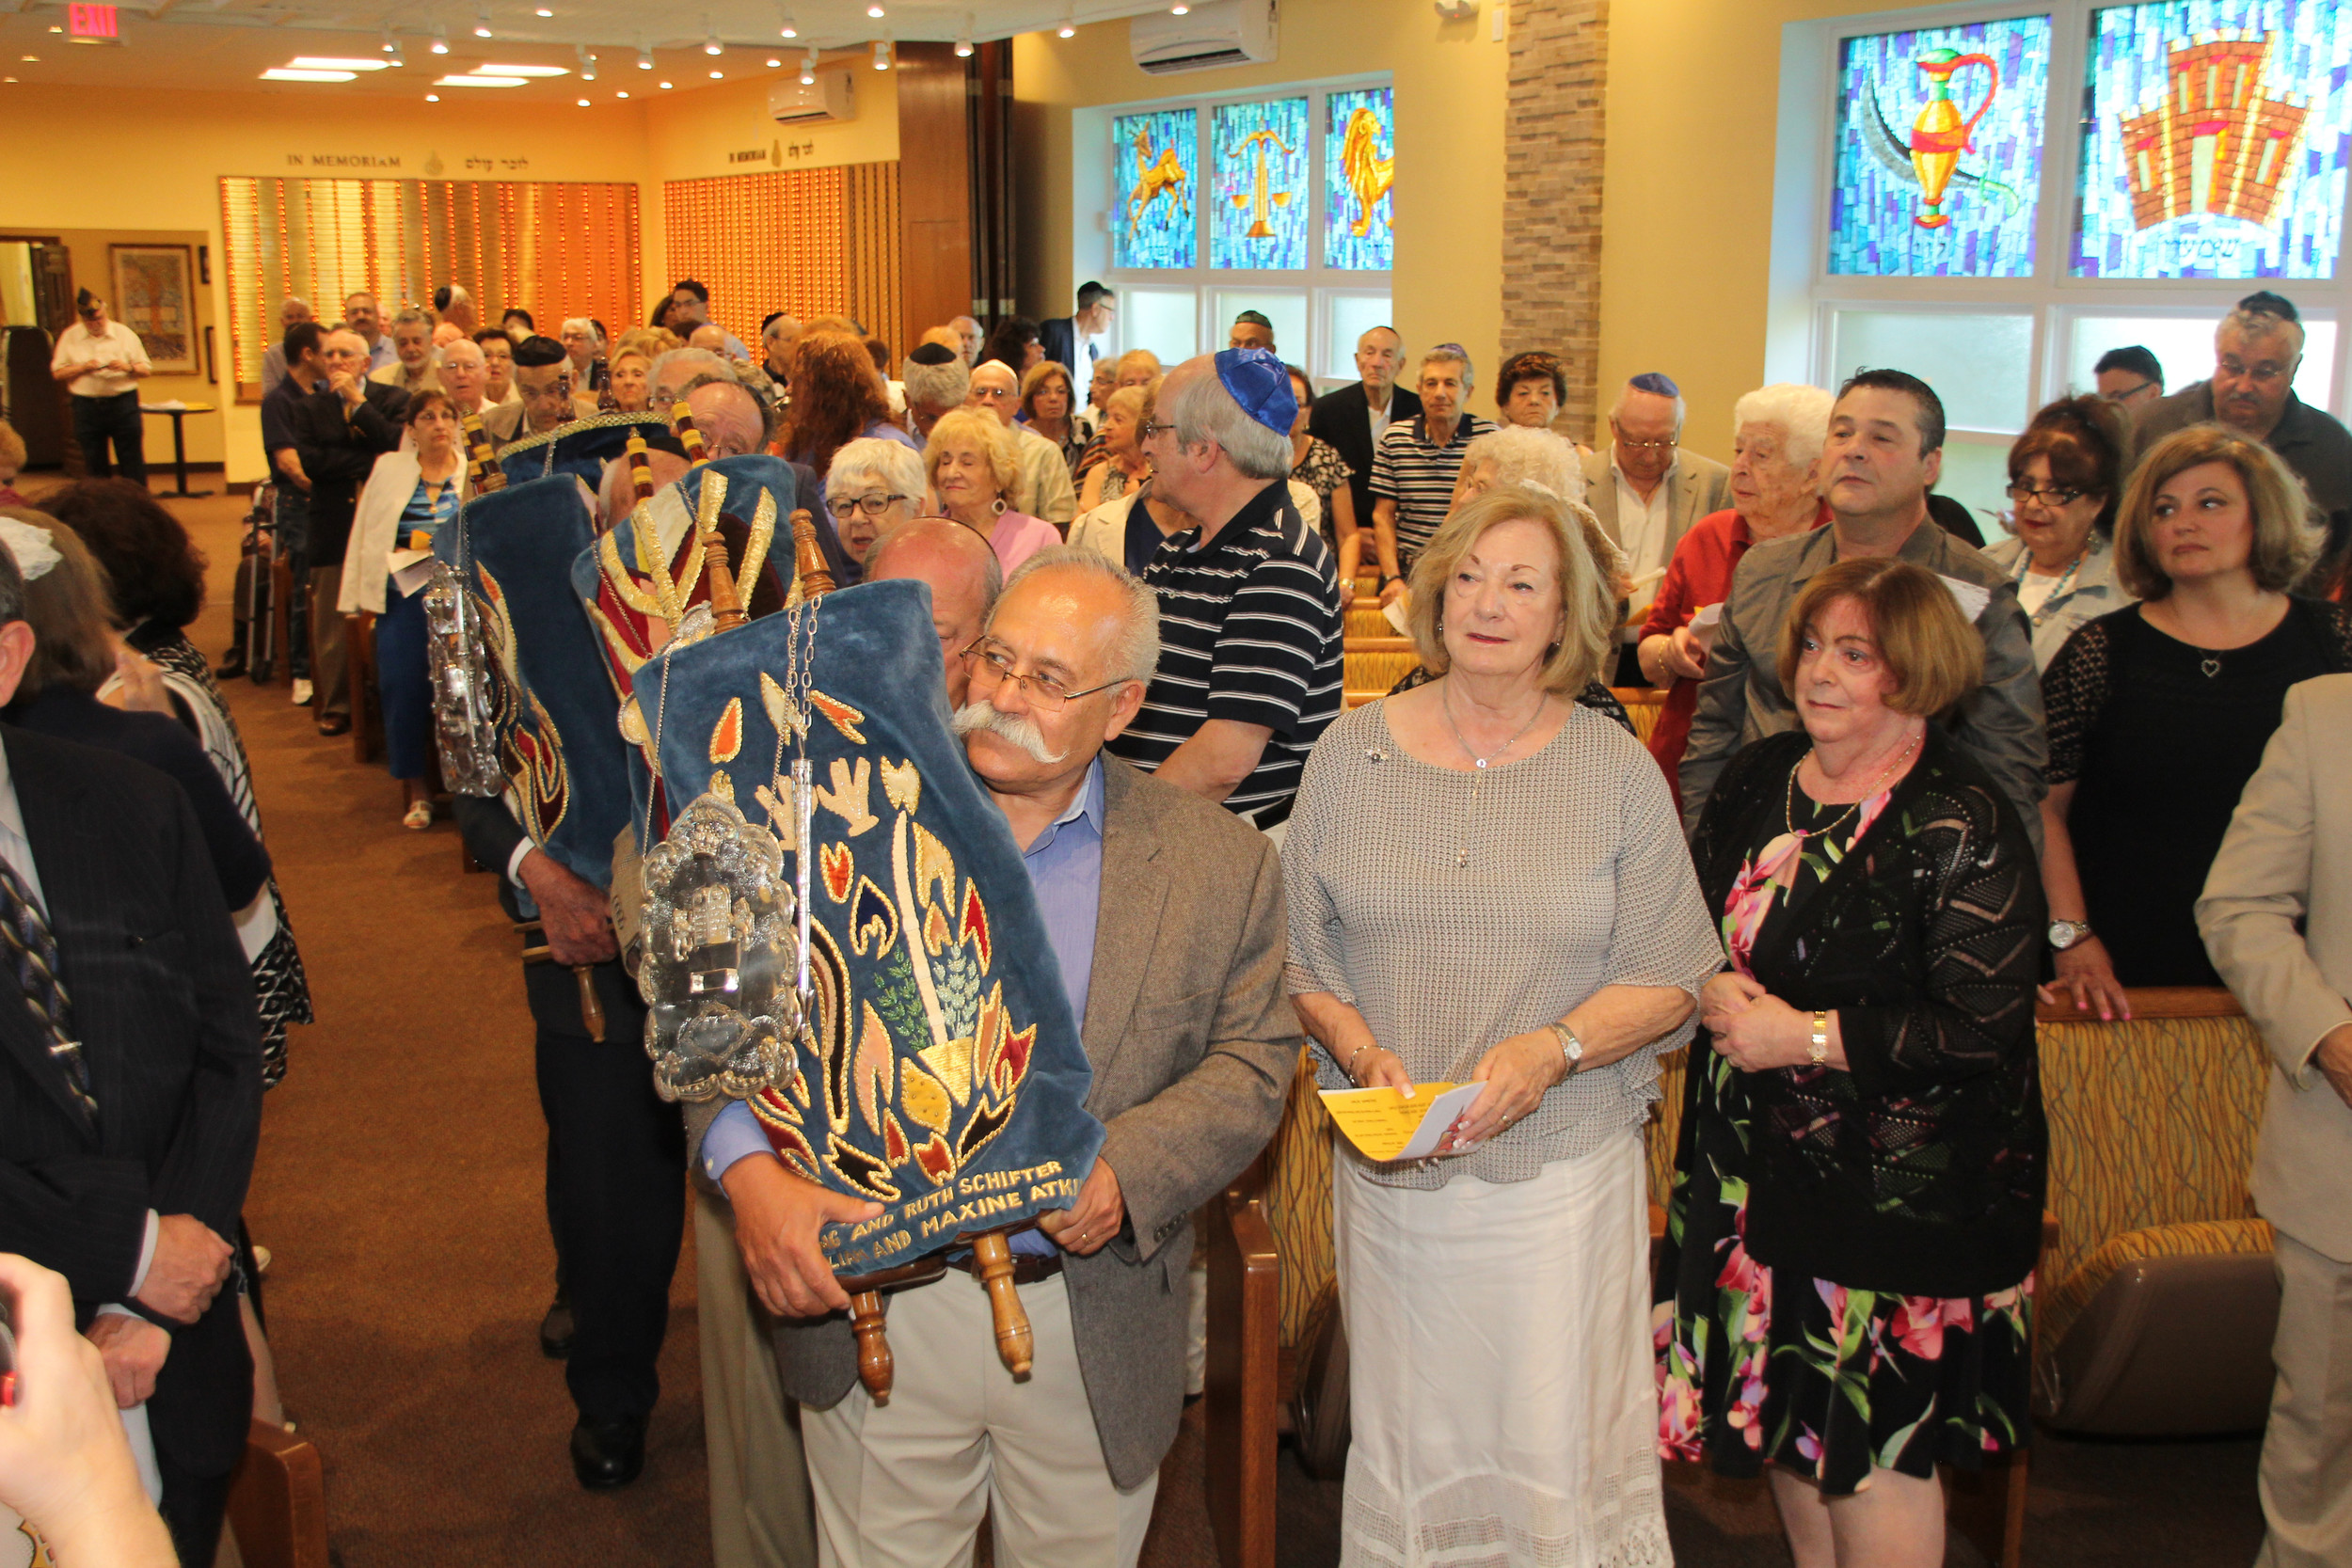 Members of Congregation Beth Tikvah brought the Torahs up to the Holy Ark at the dedication ceremony for the remodeled sanctuary last Sunday evening.